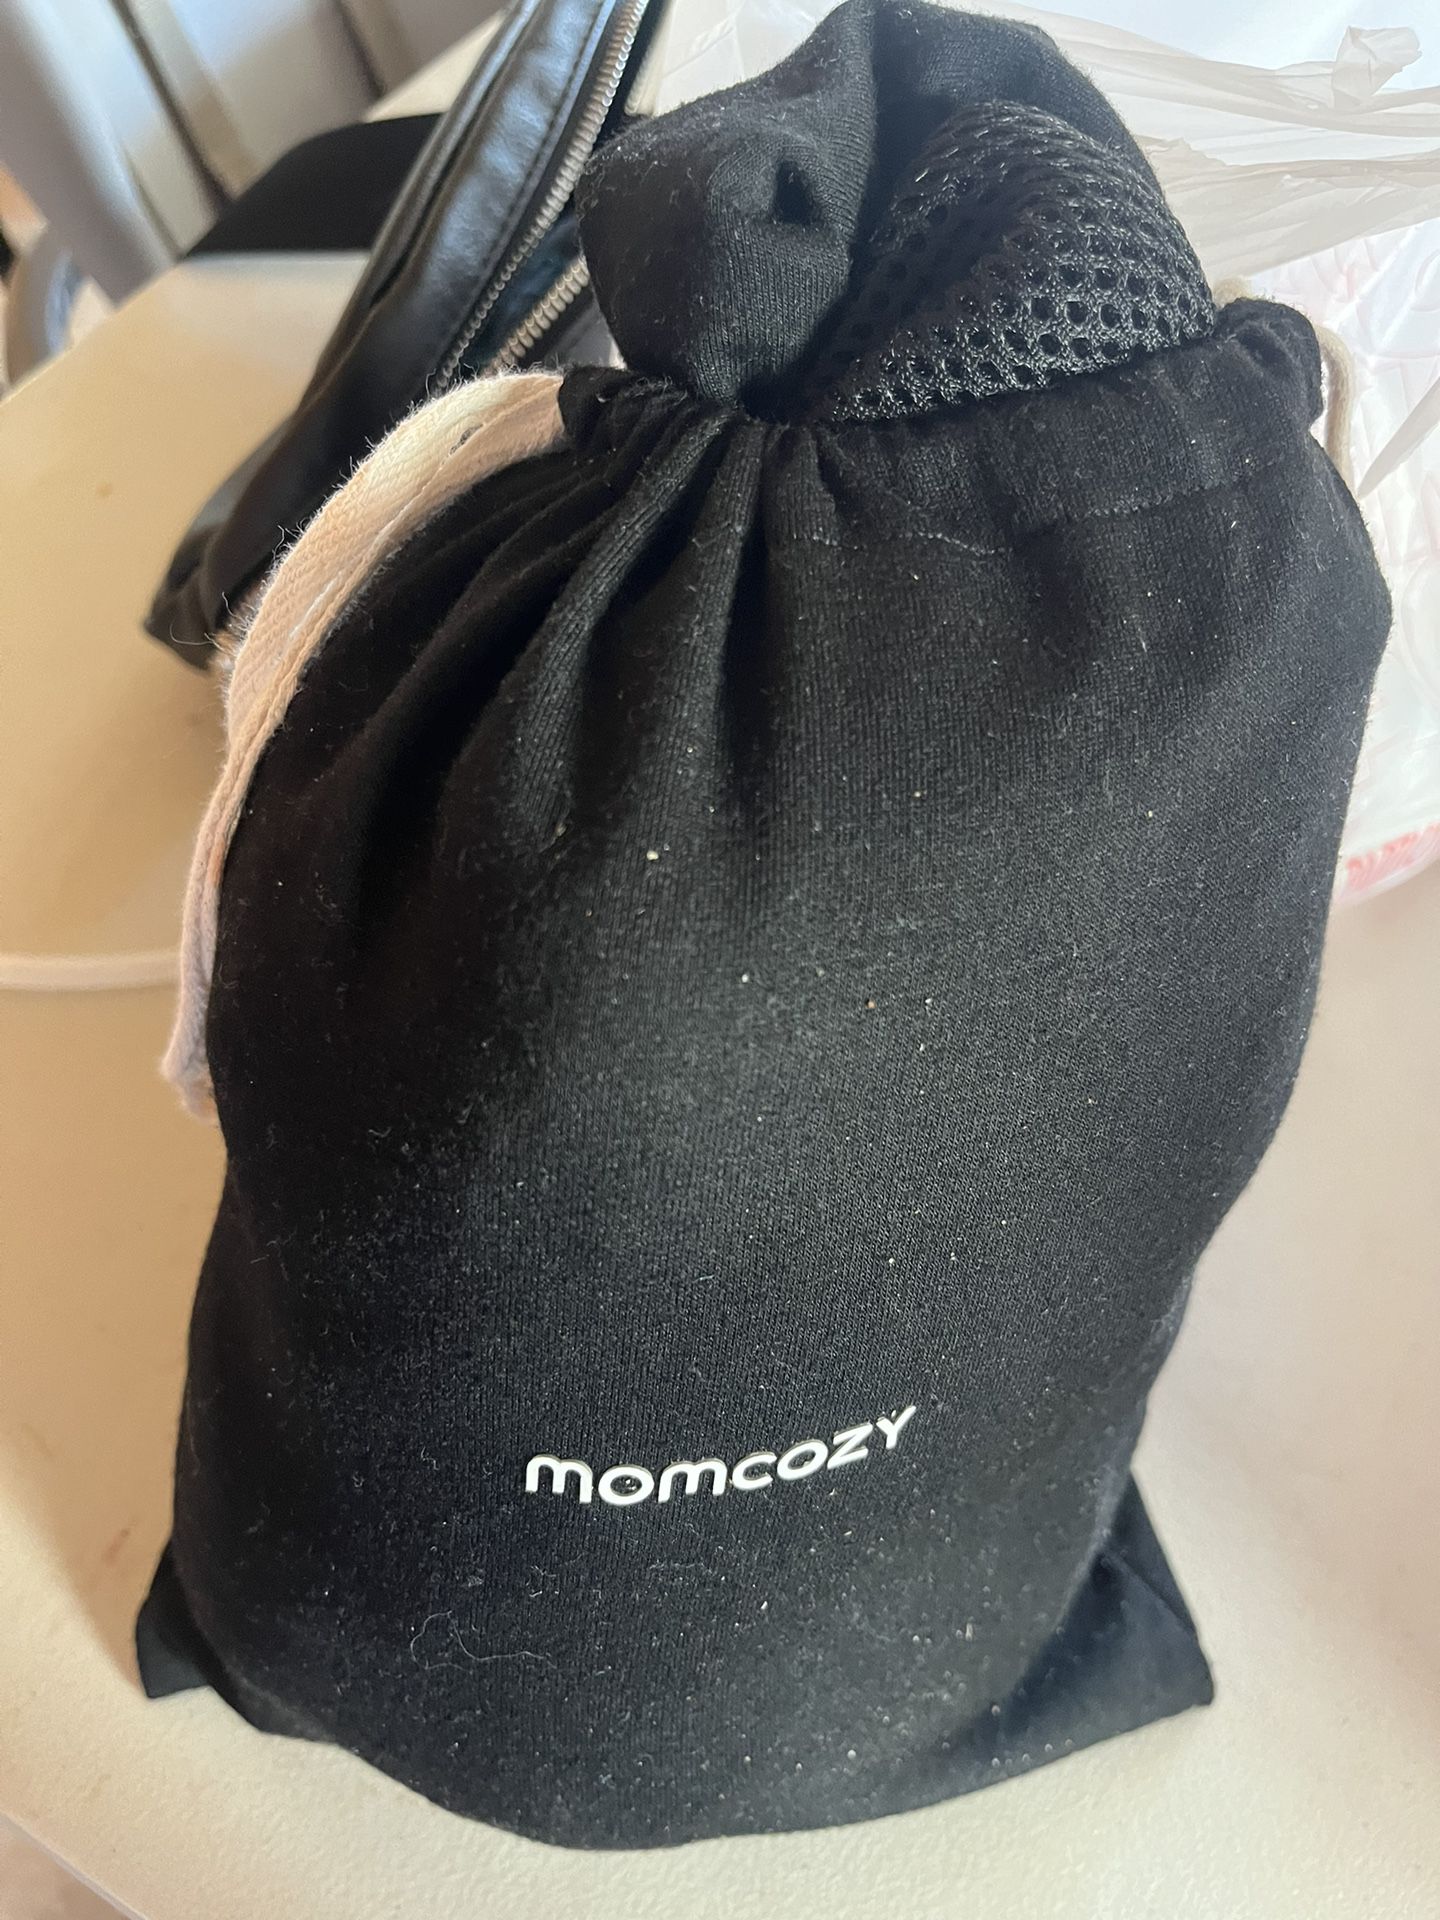 Mom Cozy Baby Carrier 